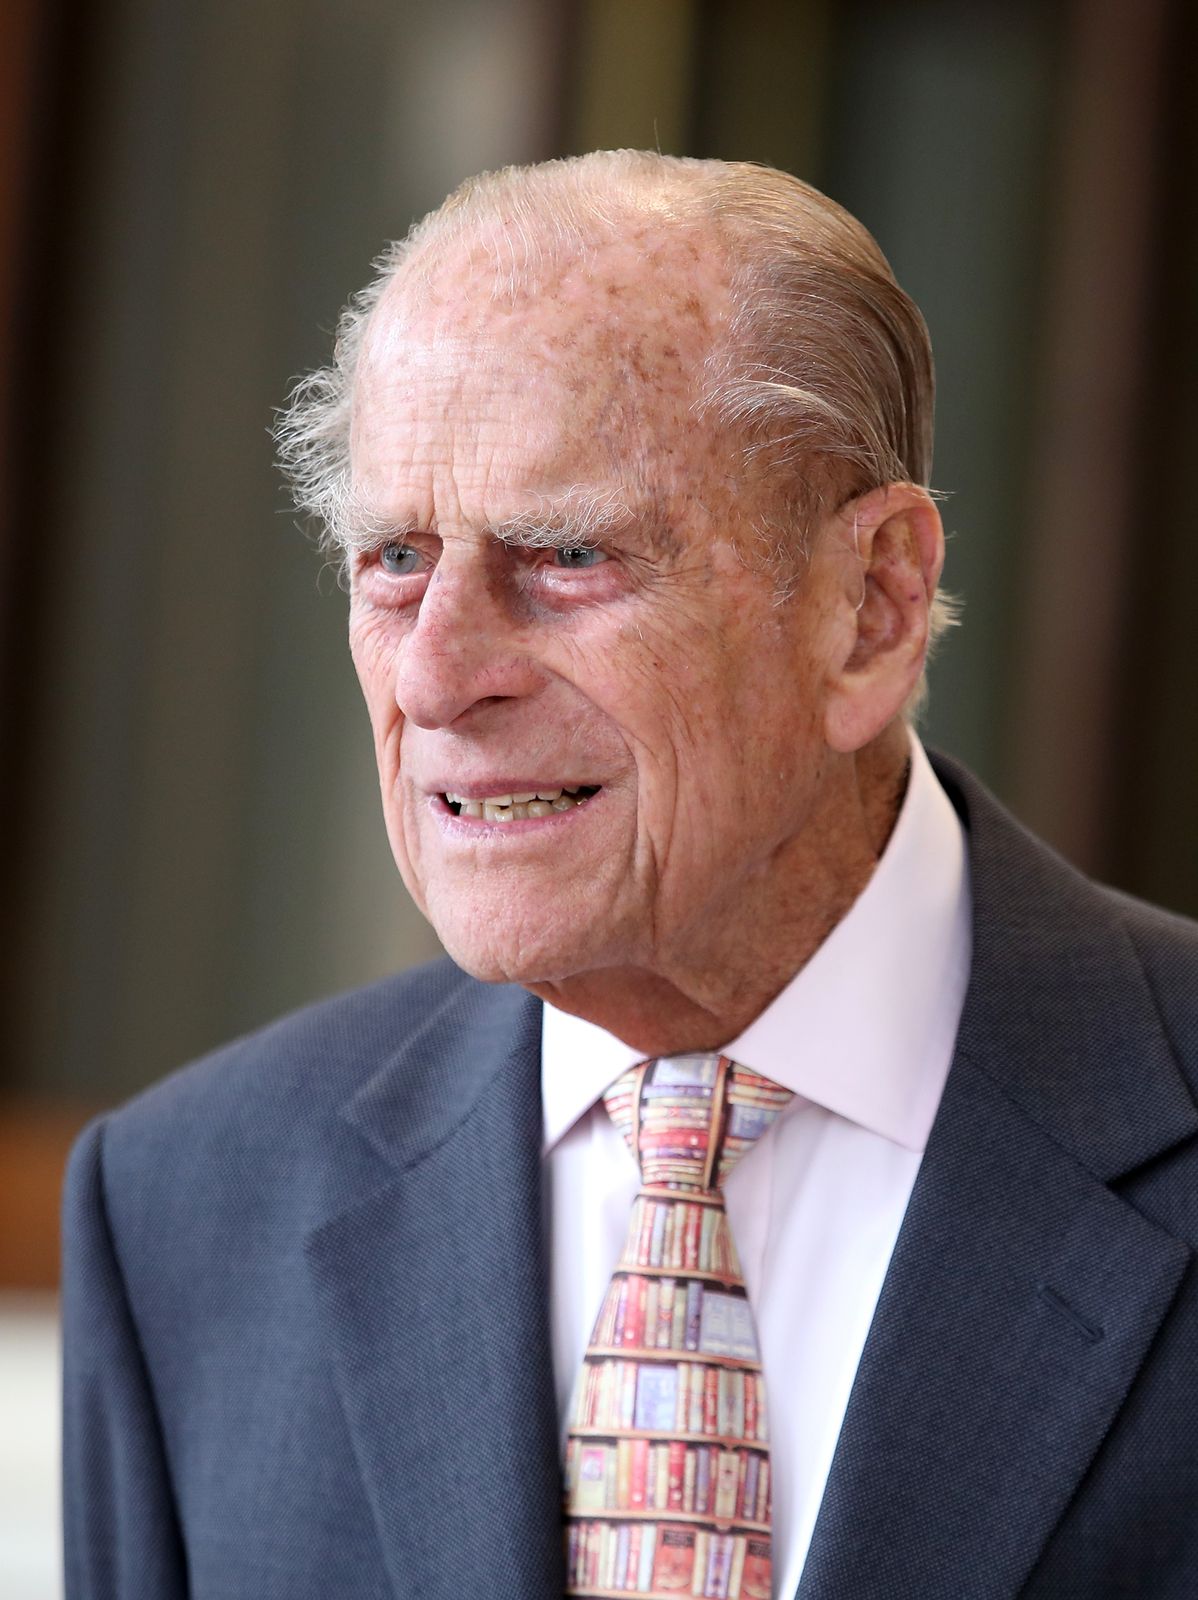 Prince Philip at a state visit by the King and Queen of Spain on July 14, 2017, in London, England | Photo: Getty Images